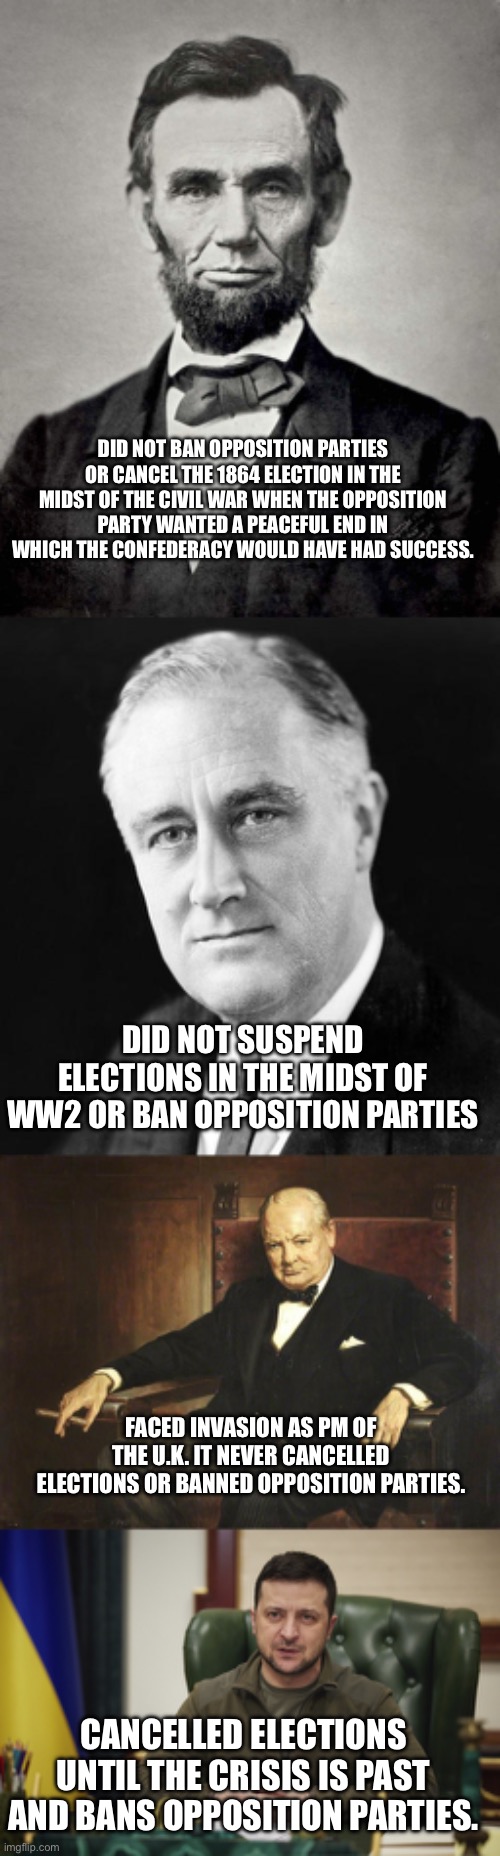 Why are we propping up a dictator | DID NOT BAN OPPOSITION PARTIES OR CANCEL THE 1864 ELECTION IN THE MIDST OF THE CIVIL WAR WHEN THE OPPOSITION PARTY WANTED A PEACEFUL END IN WHICH THE CONFEDERACY WOULD HAVE HAD SUCCESS. DID NOT SUSPEND ELECTIONS IN THE MIDST OF WW2 OR BAN OPPOSITION PARTIES; FACED INVASION AS PM OF THE U.K. IT NEVER CANCELLED ELECTIONS OR BANNED OPPOSITION PARTIES. CANCELLED ELECTIONS UNTIL THE CRISIS IS PAST AND BANS OPPOSITION PARTIES. | image tagged in abraham lincoln,fdr promise,zalensky | made w/ Imgflip meme maker